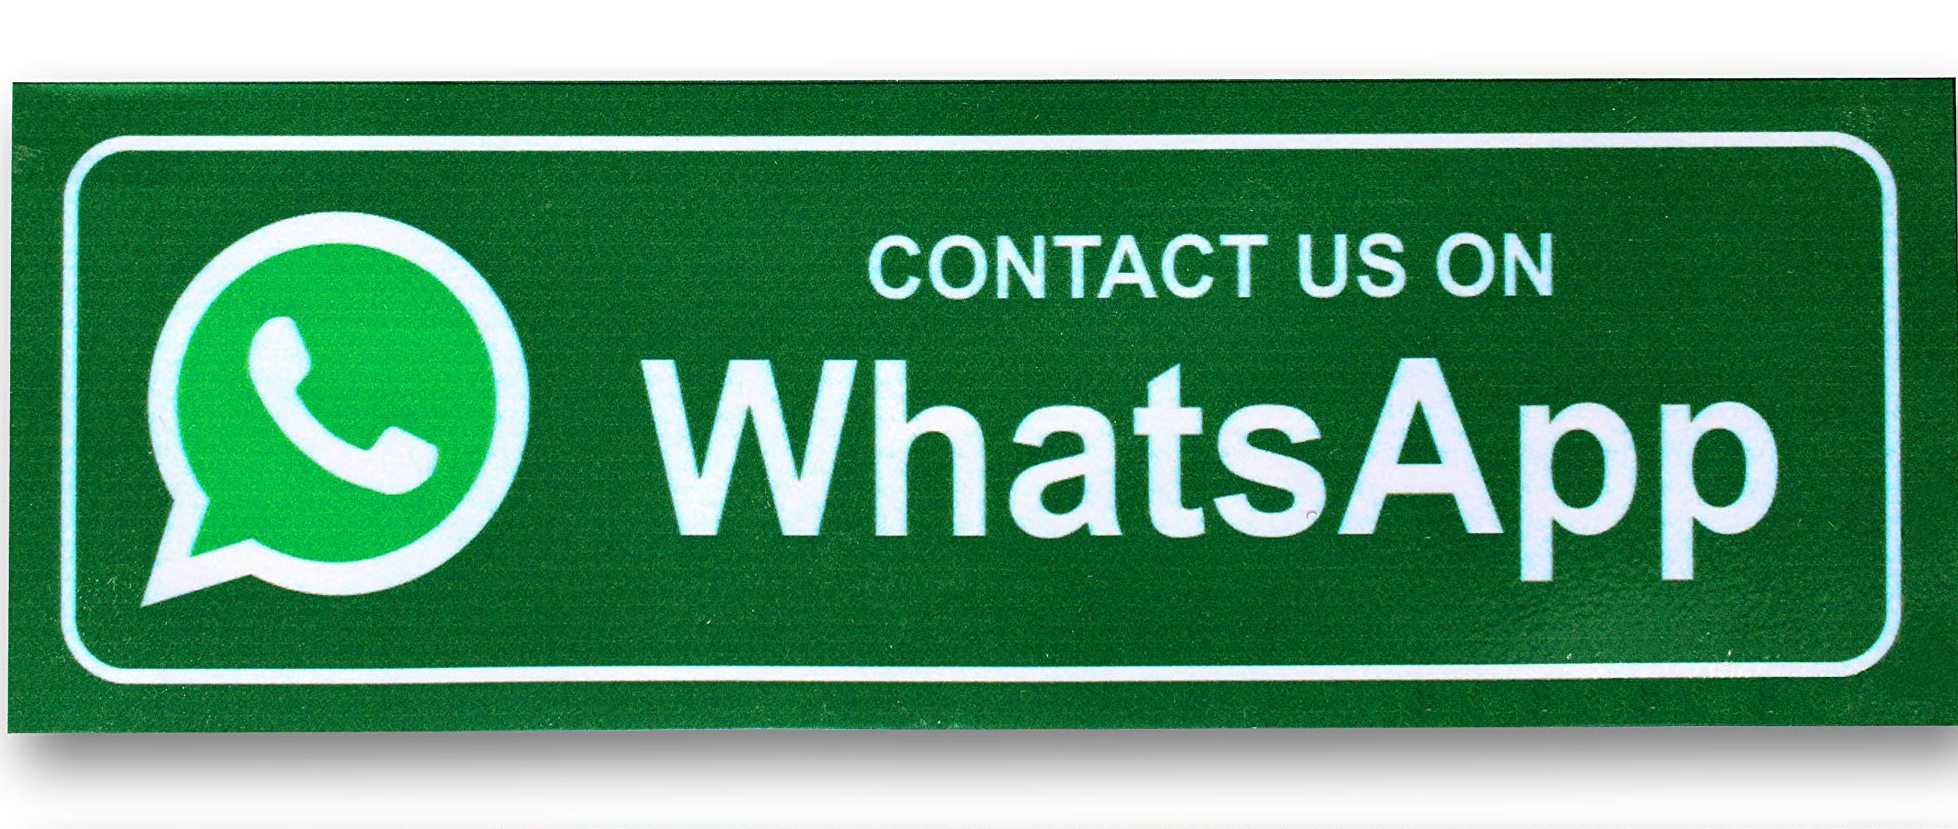 Contact us Whats App